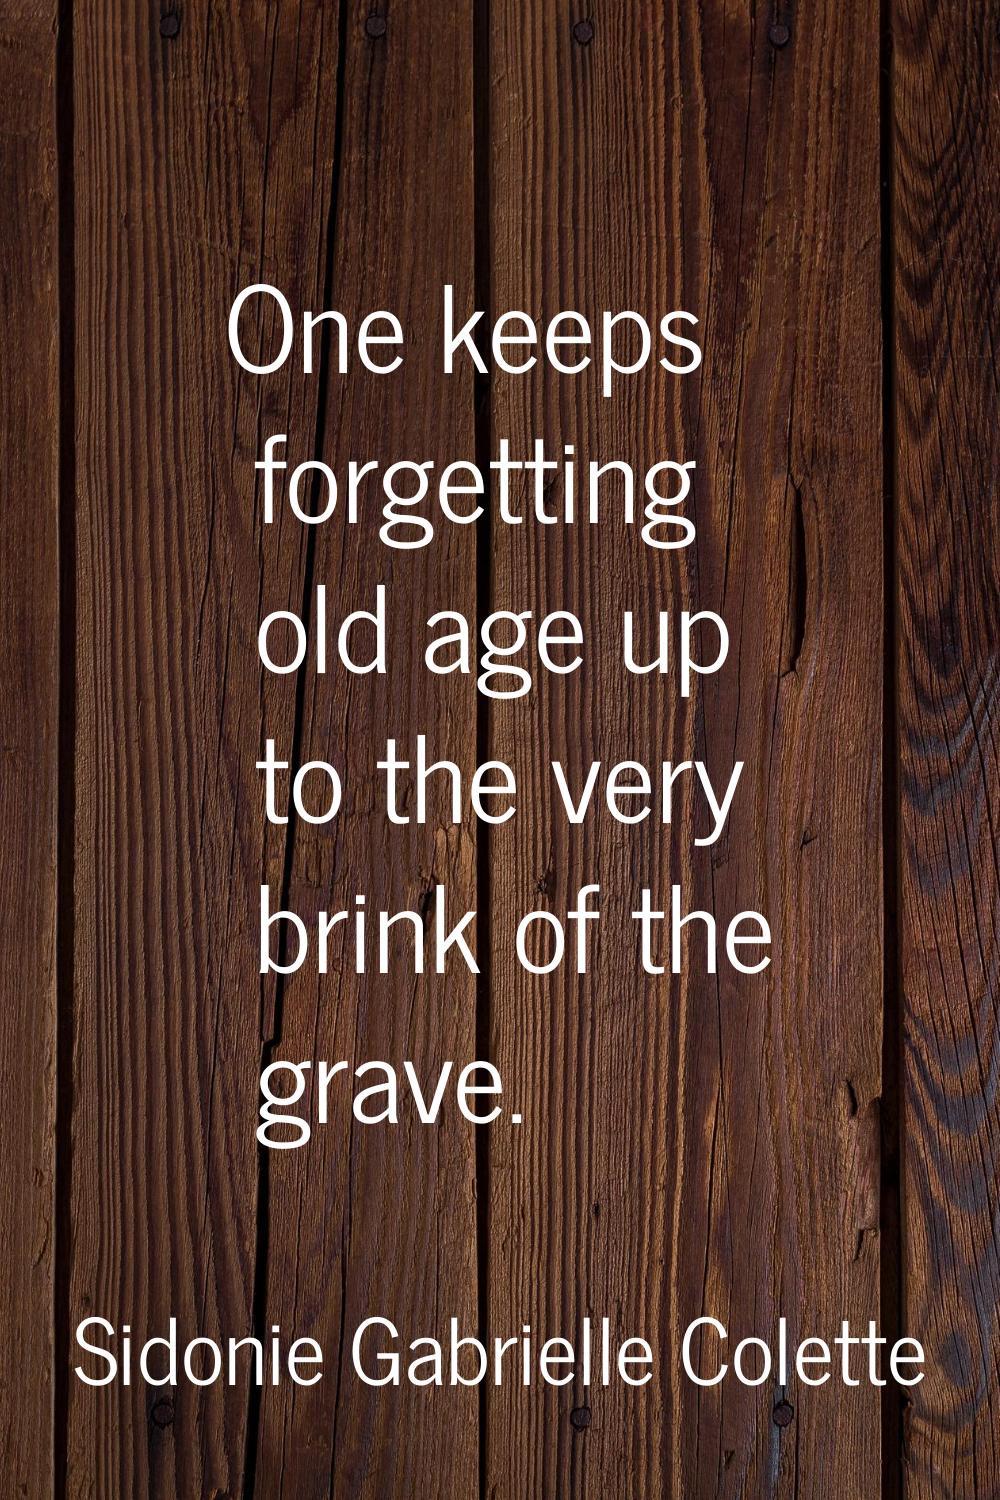 One keeps forgetting old age up to the very brink of the grave.